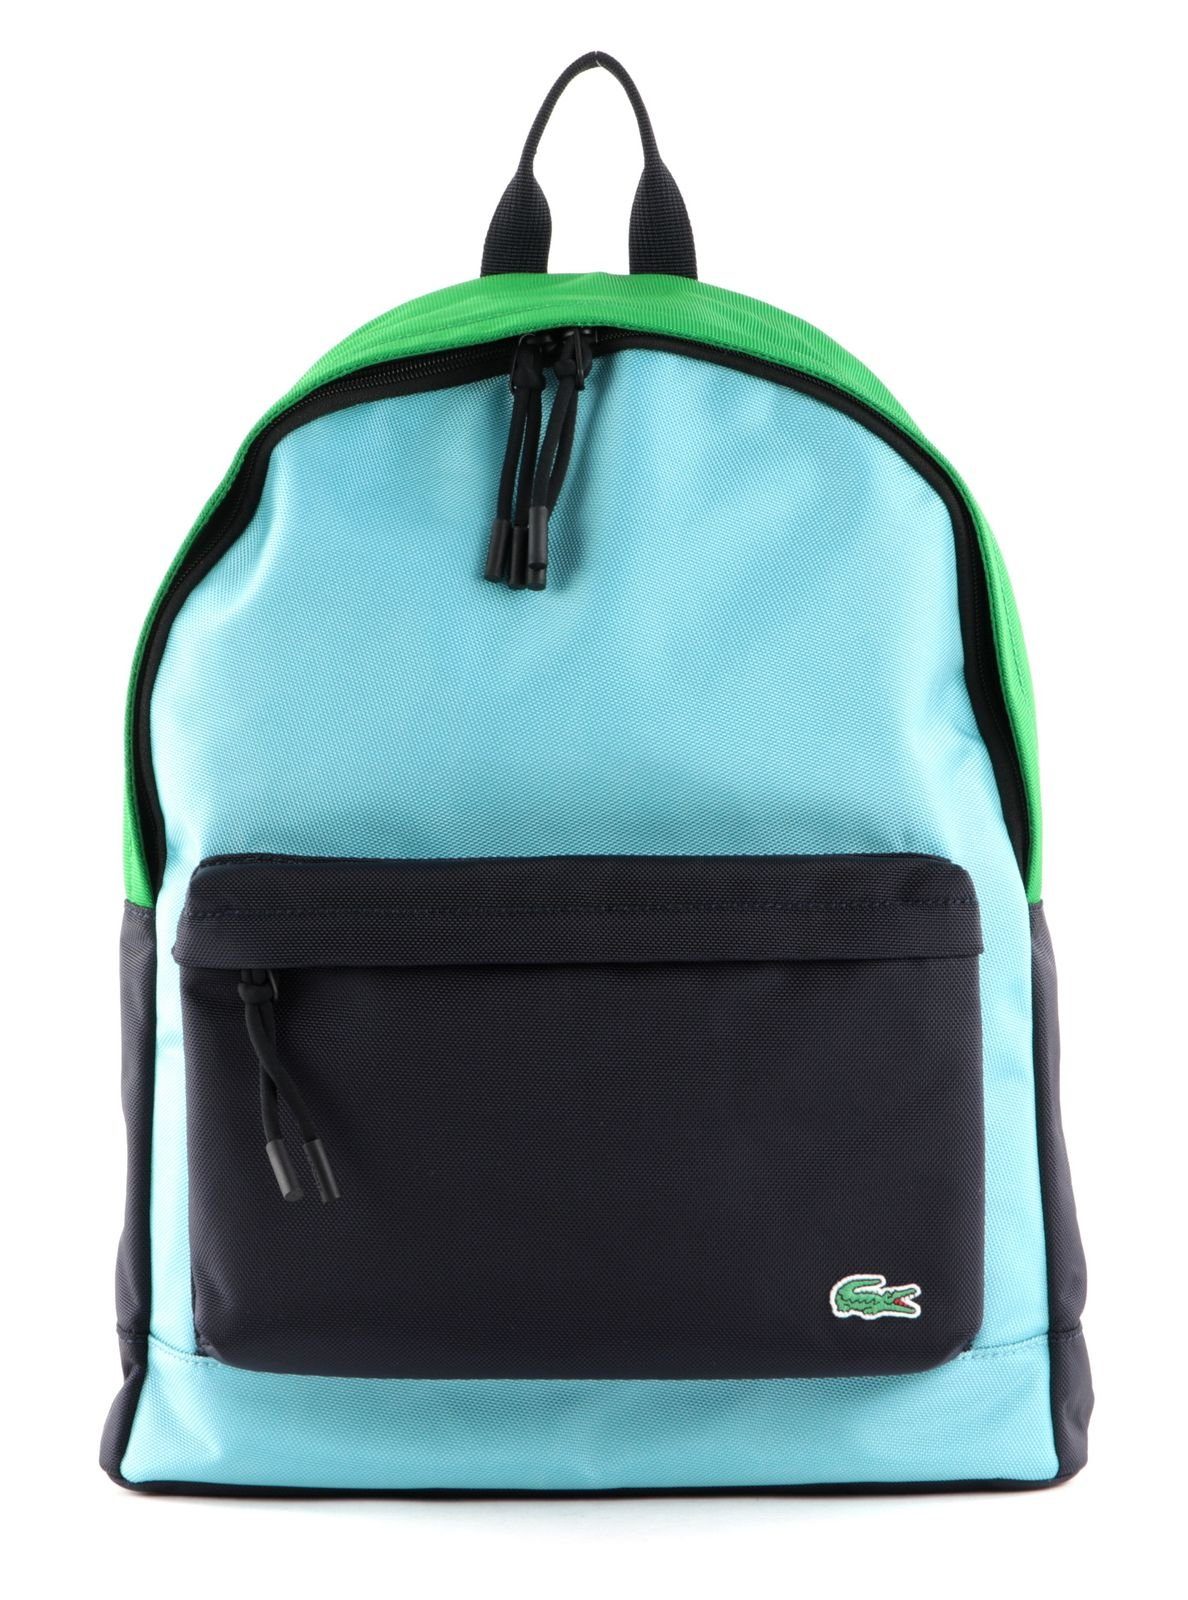 Malachite Lacoste Abime Azur Holiday Rucksack Package